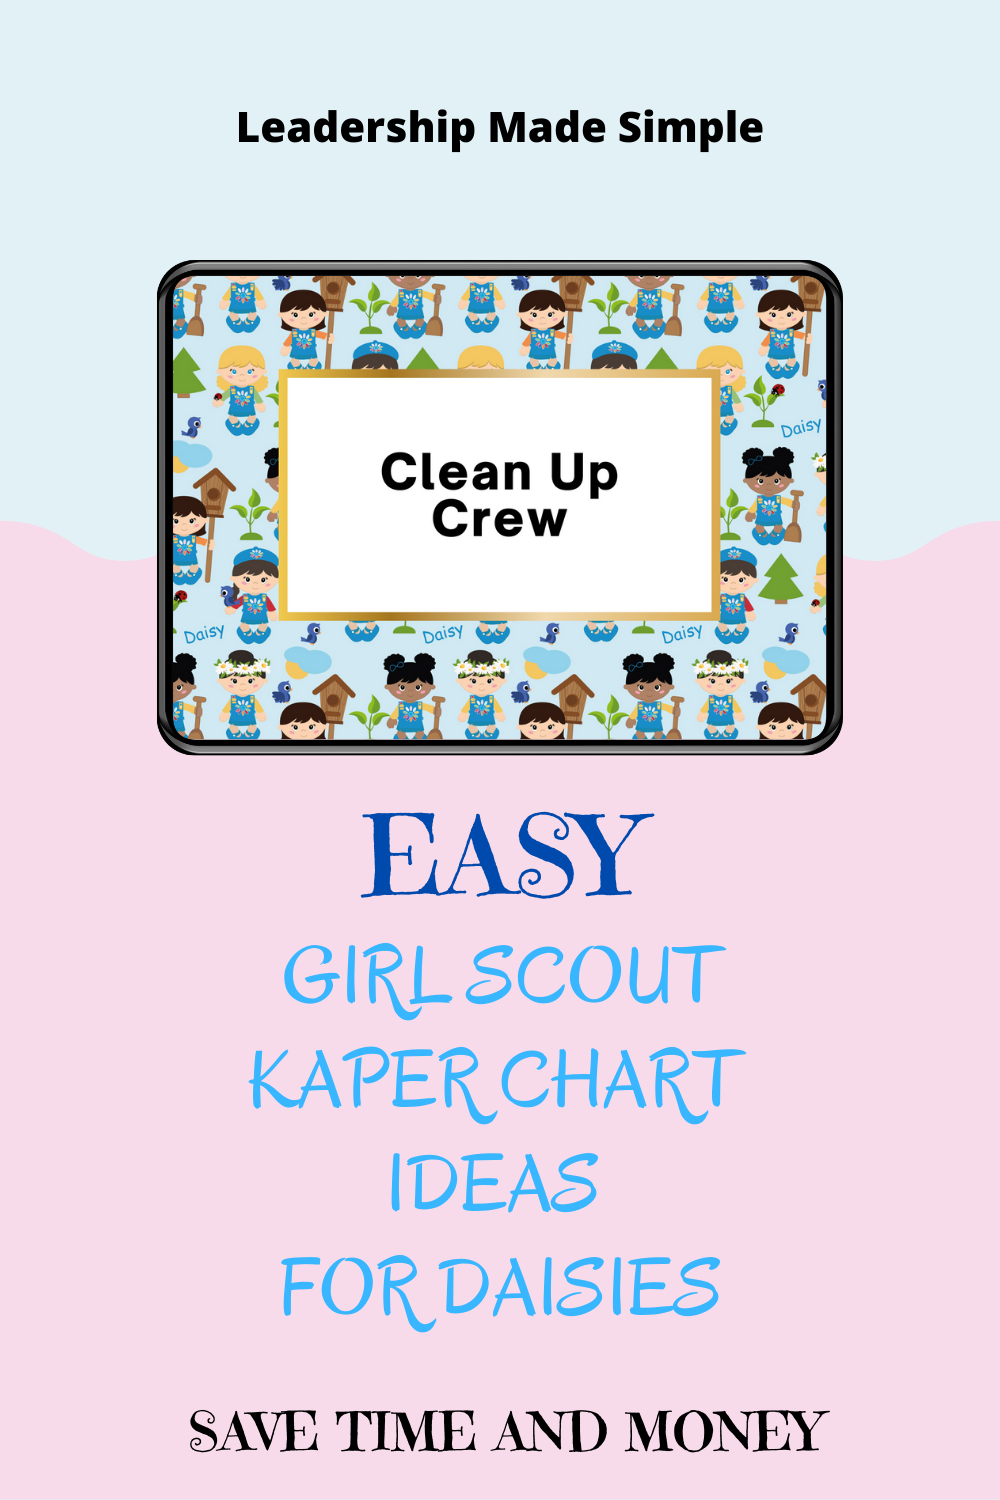 Daisy Troop Girl Scout Kaper Chart Ideas and Resources